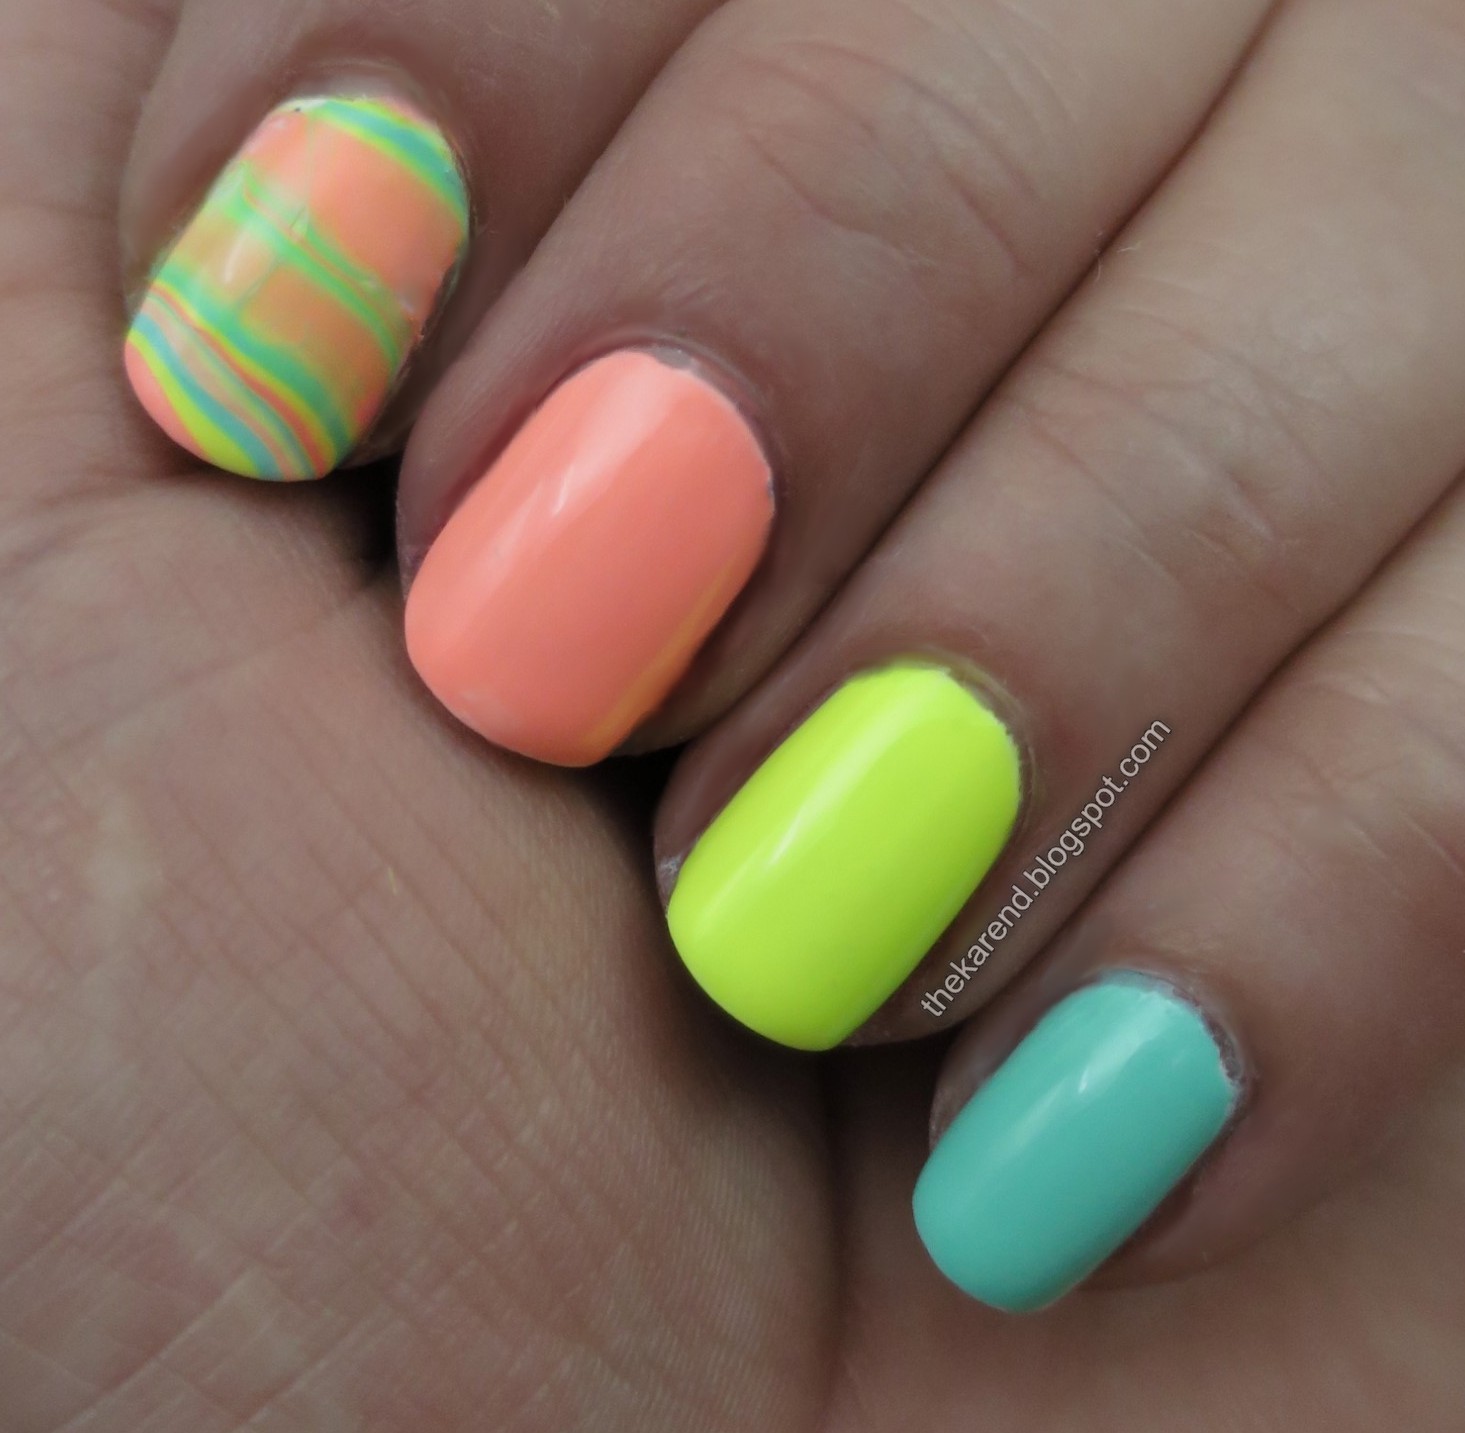 Frazzle and Aniploish: LA Colors Creamy Neon Collection